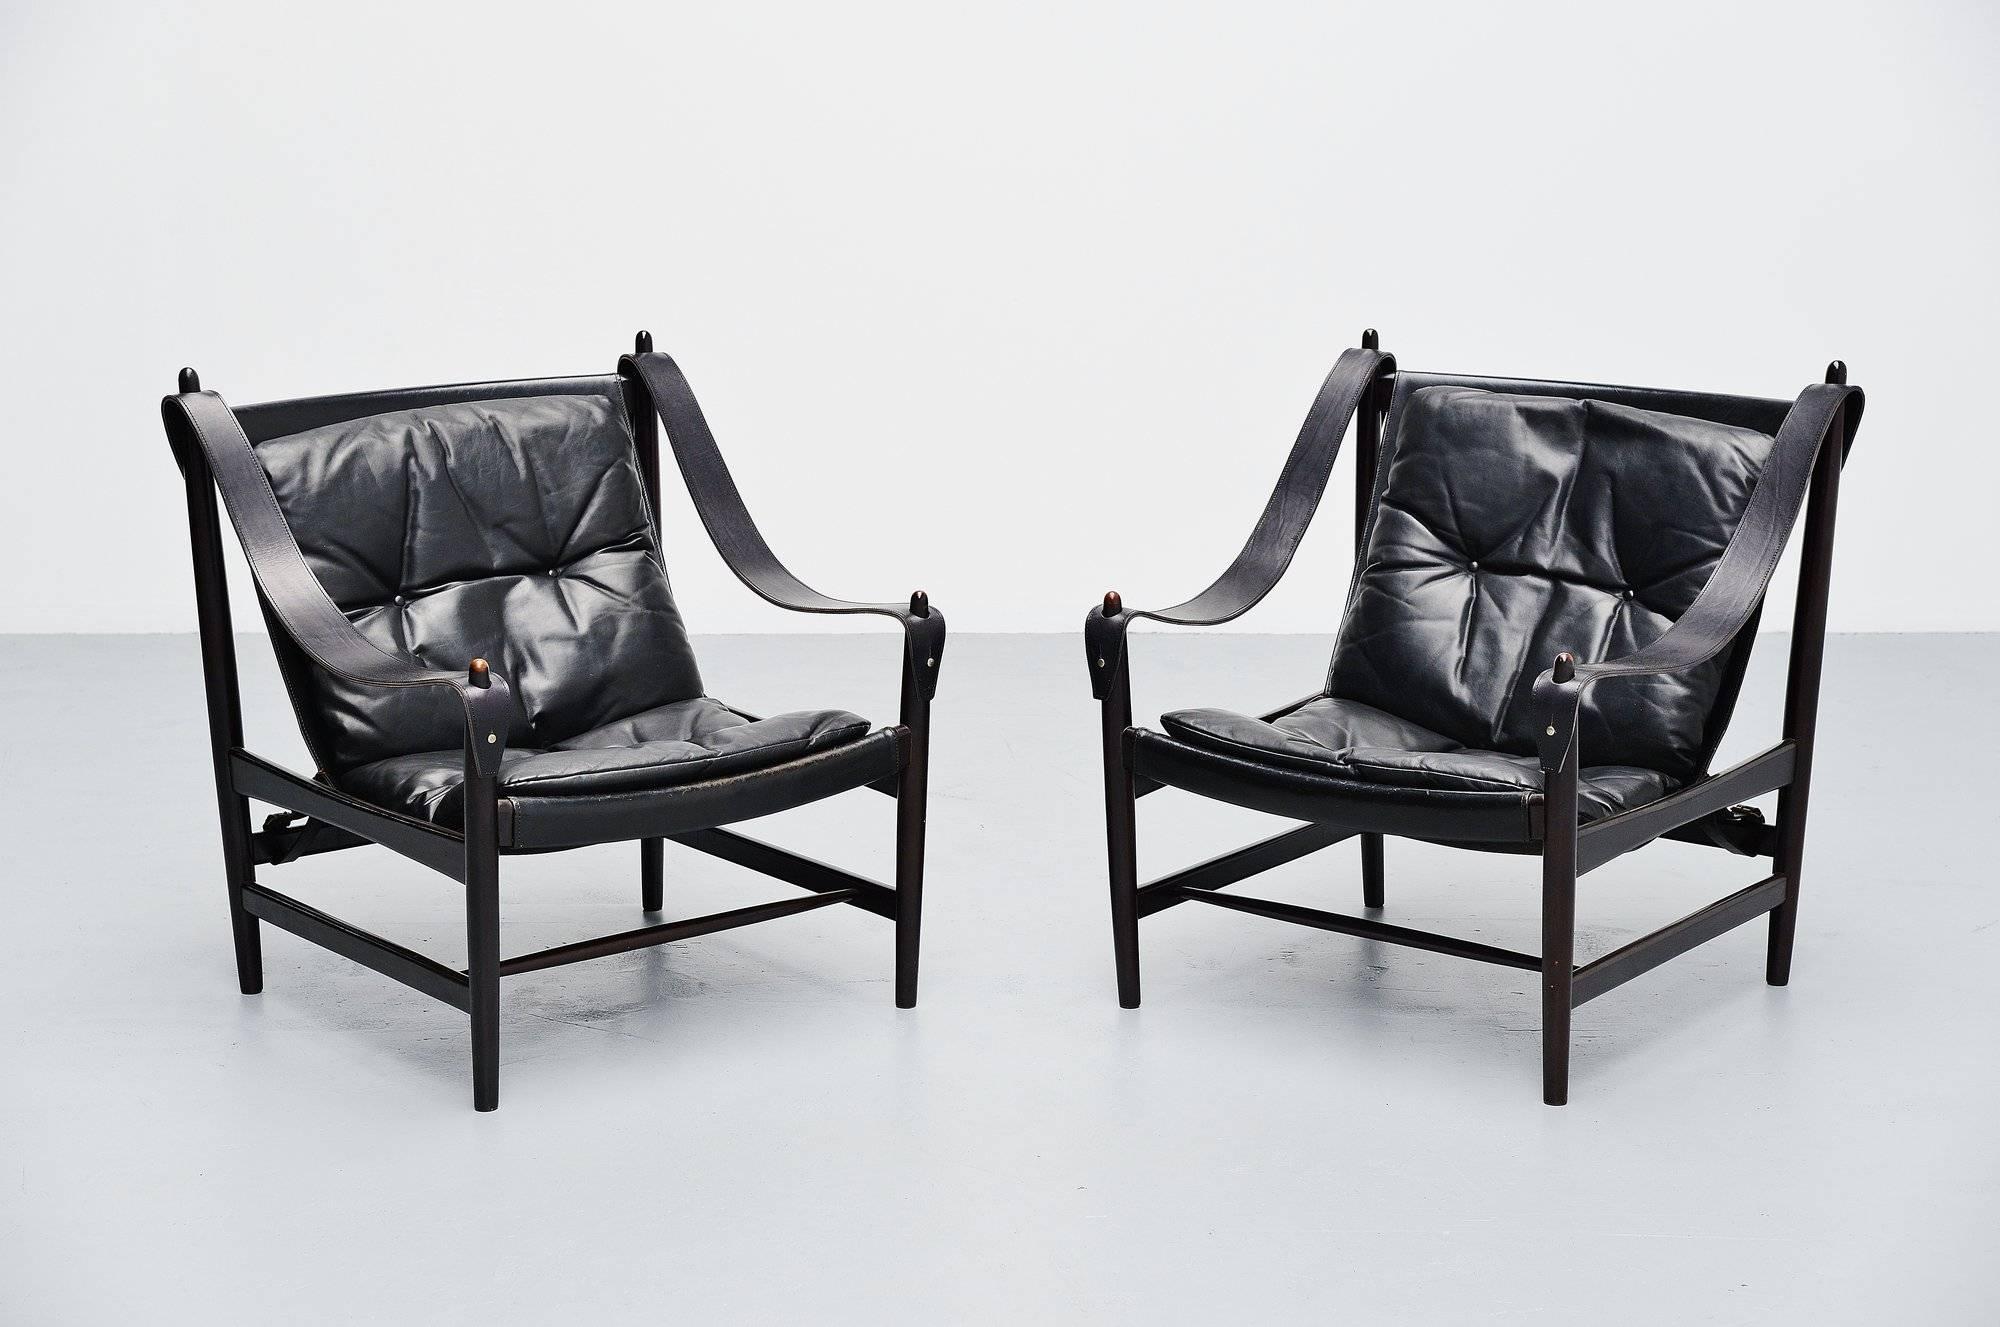 Exceptional pair of large 'safari' chairs made by unknown designer or manufacturer, in the style of Ole Wanscher, Denmark, 1960. The chairs have solid mahogany frames and black leather seats and cushions. Very nice and subtle shaped chairs in very